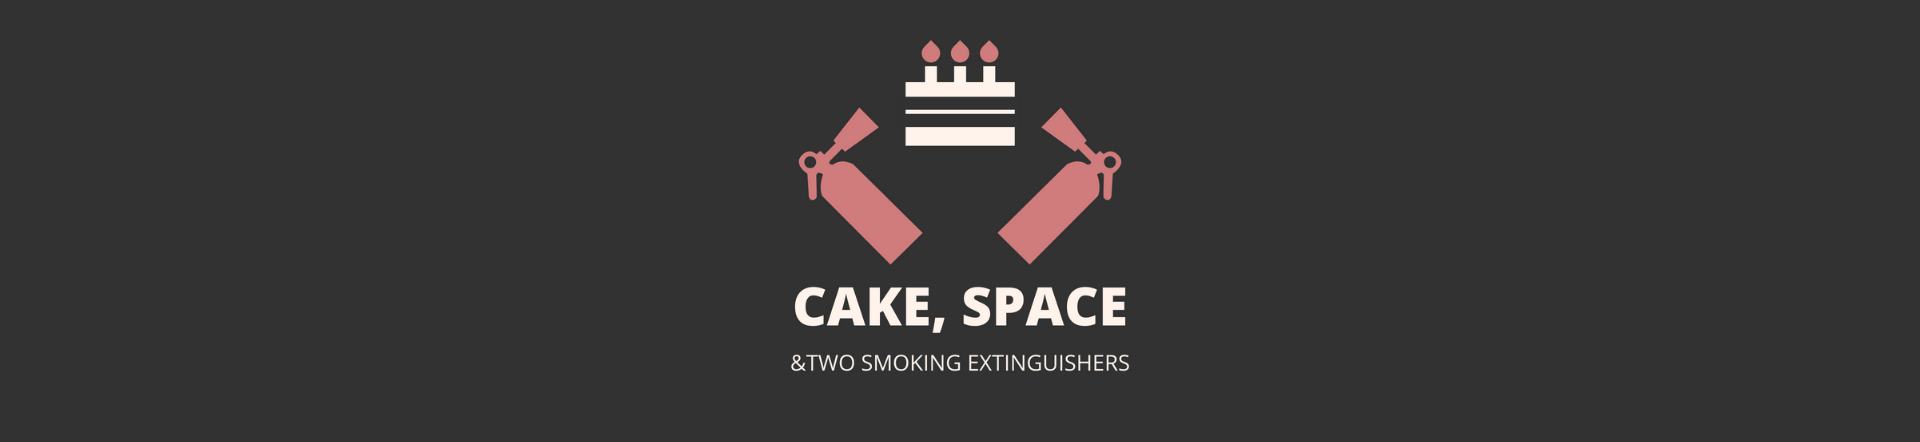 Cake, space and two smoking extinguishers